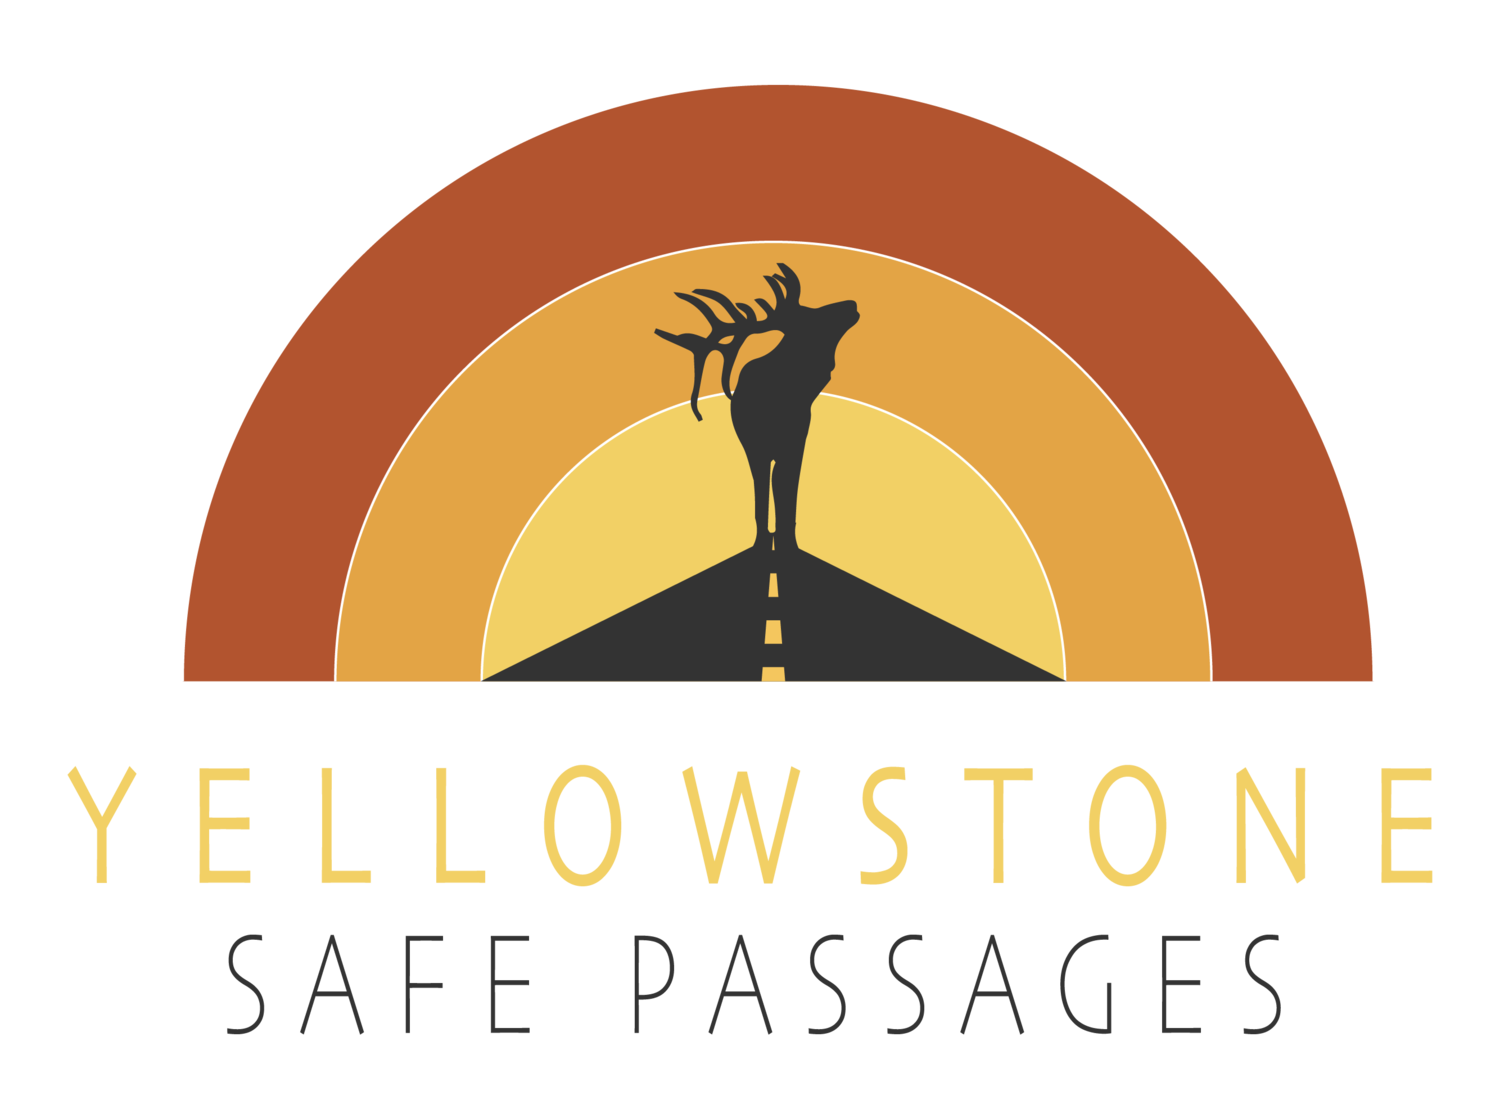 Yellowstone Safe Passages